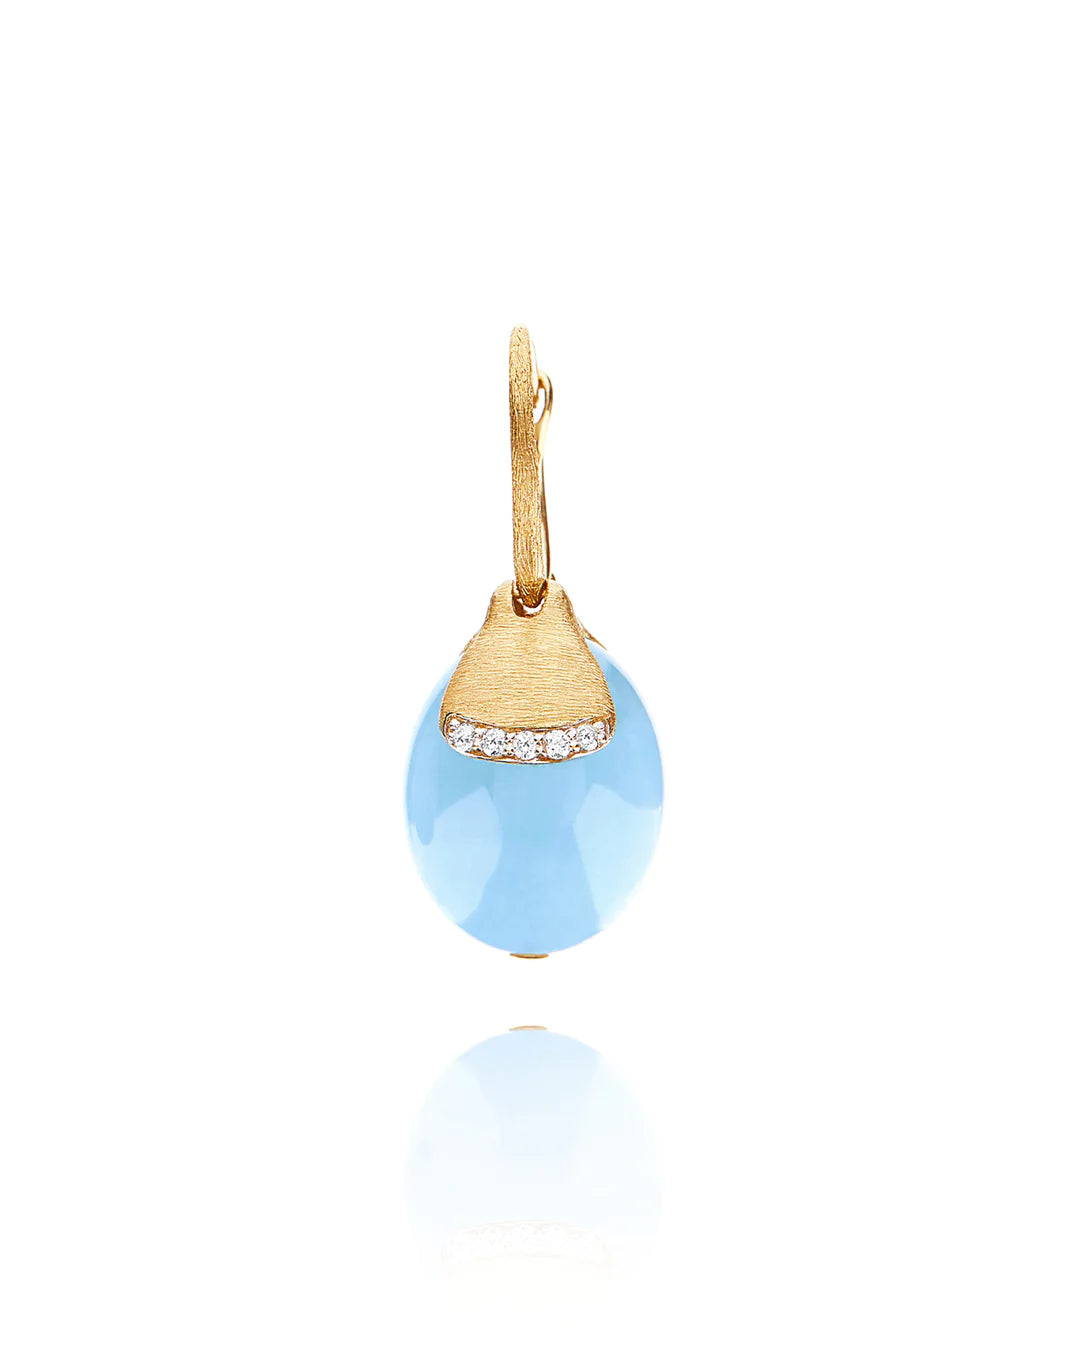 "AZURE" CILIEGINA GOLD AND MILKY AQUAMARINE BALL DROP EARRING WITH DIAMONDS DETAILS (LARGE)